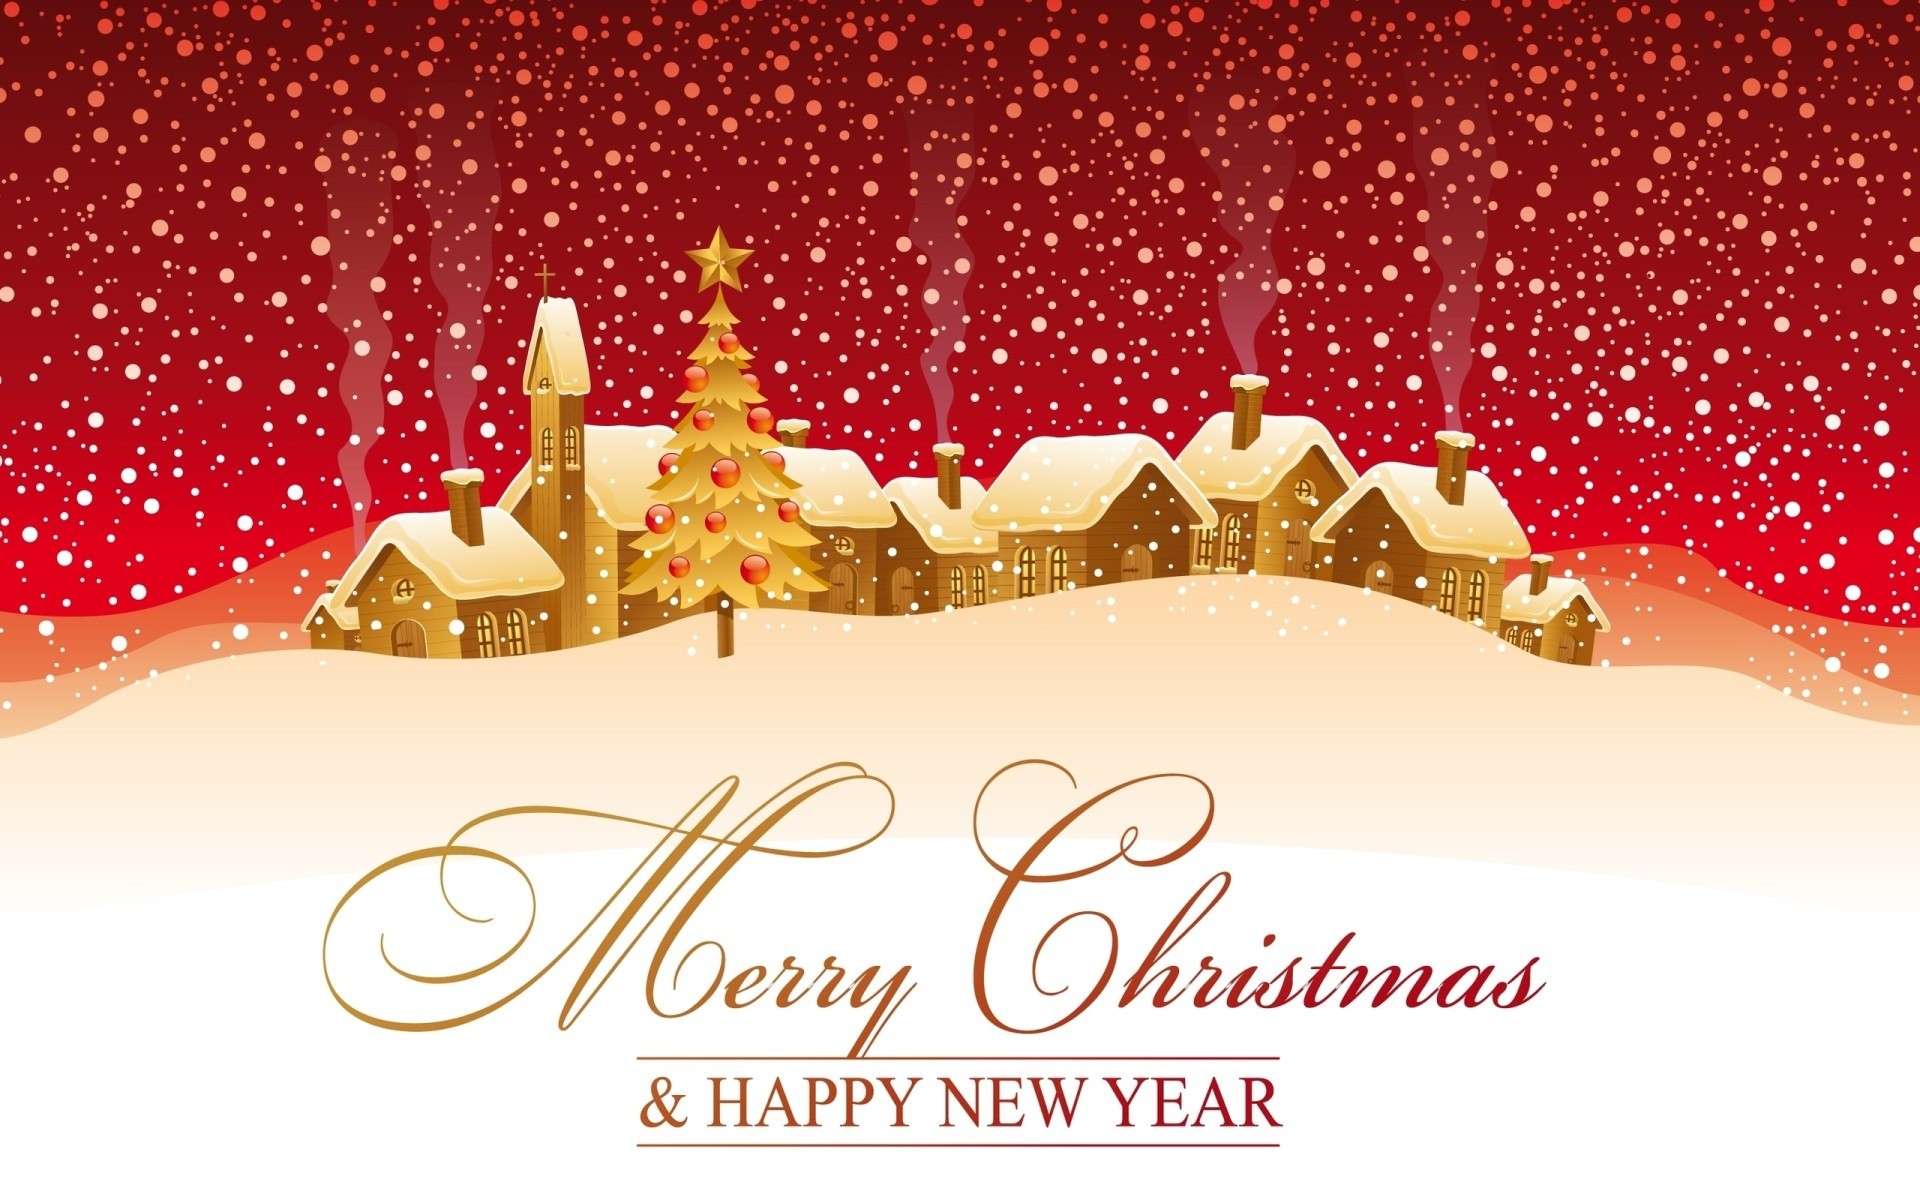 Merry Christmas And Happy New Year Hd Wallpaper Of Christmas